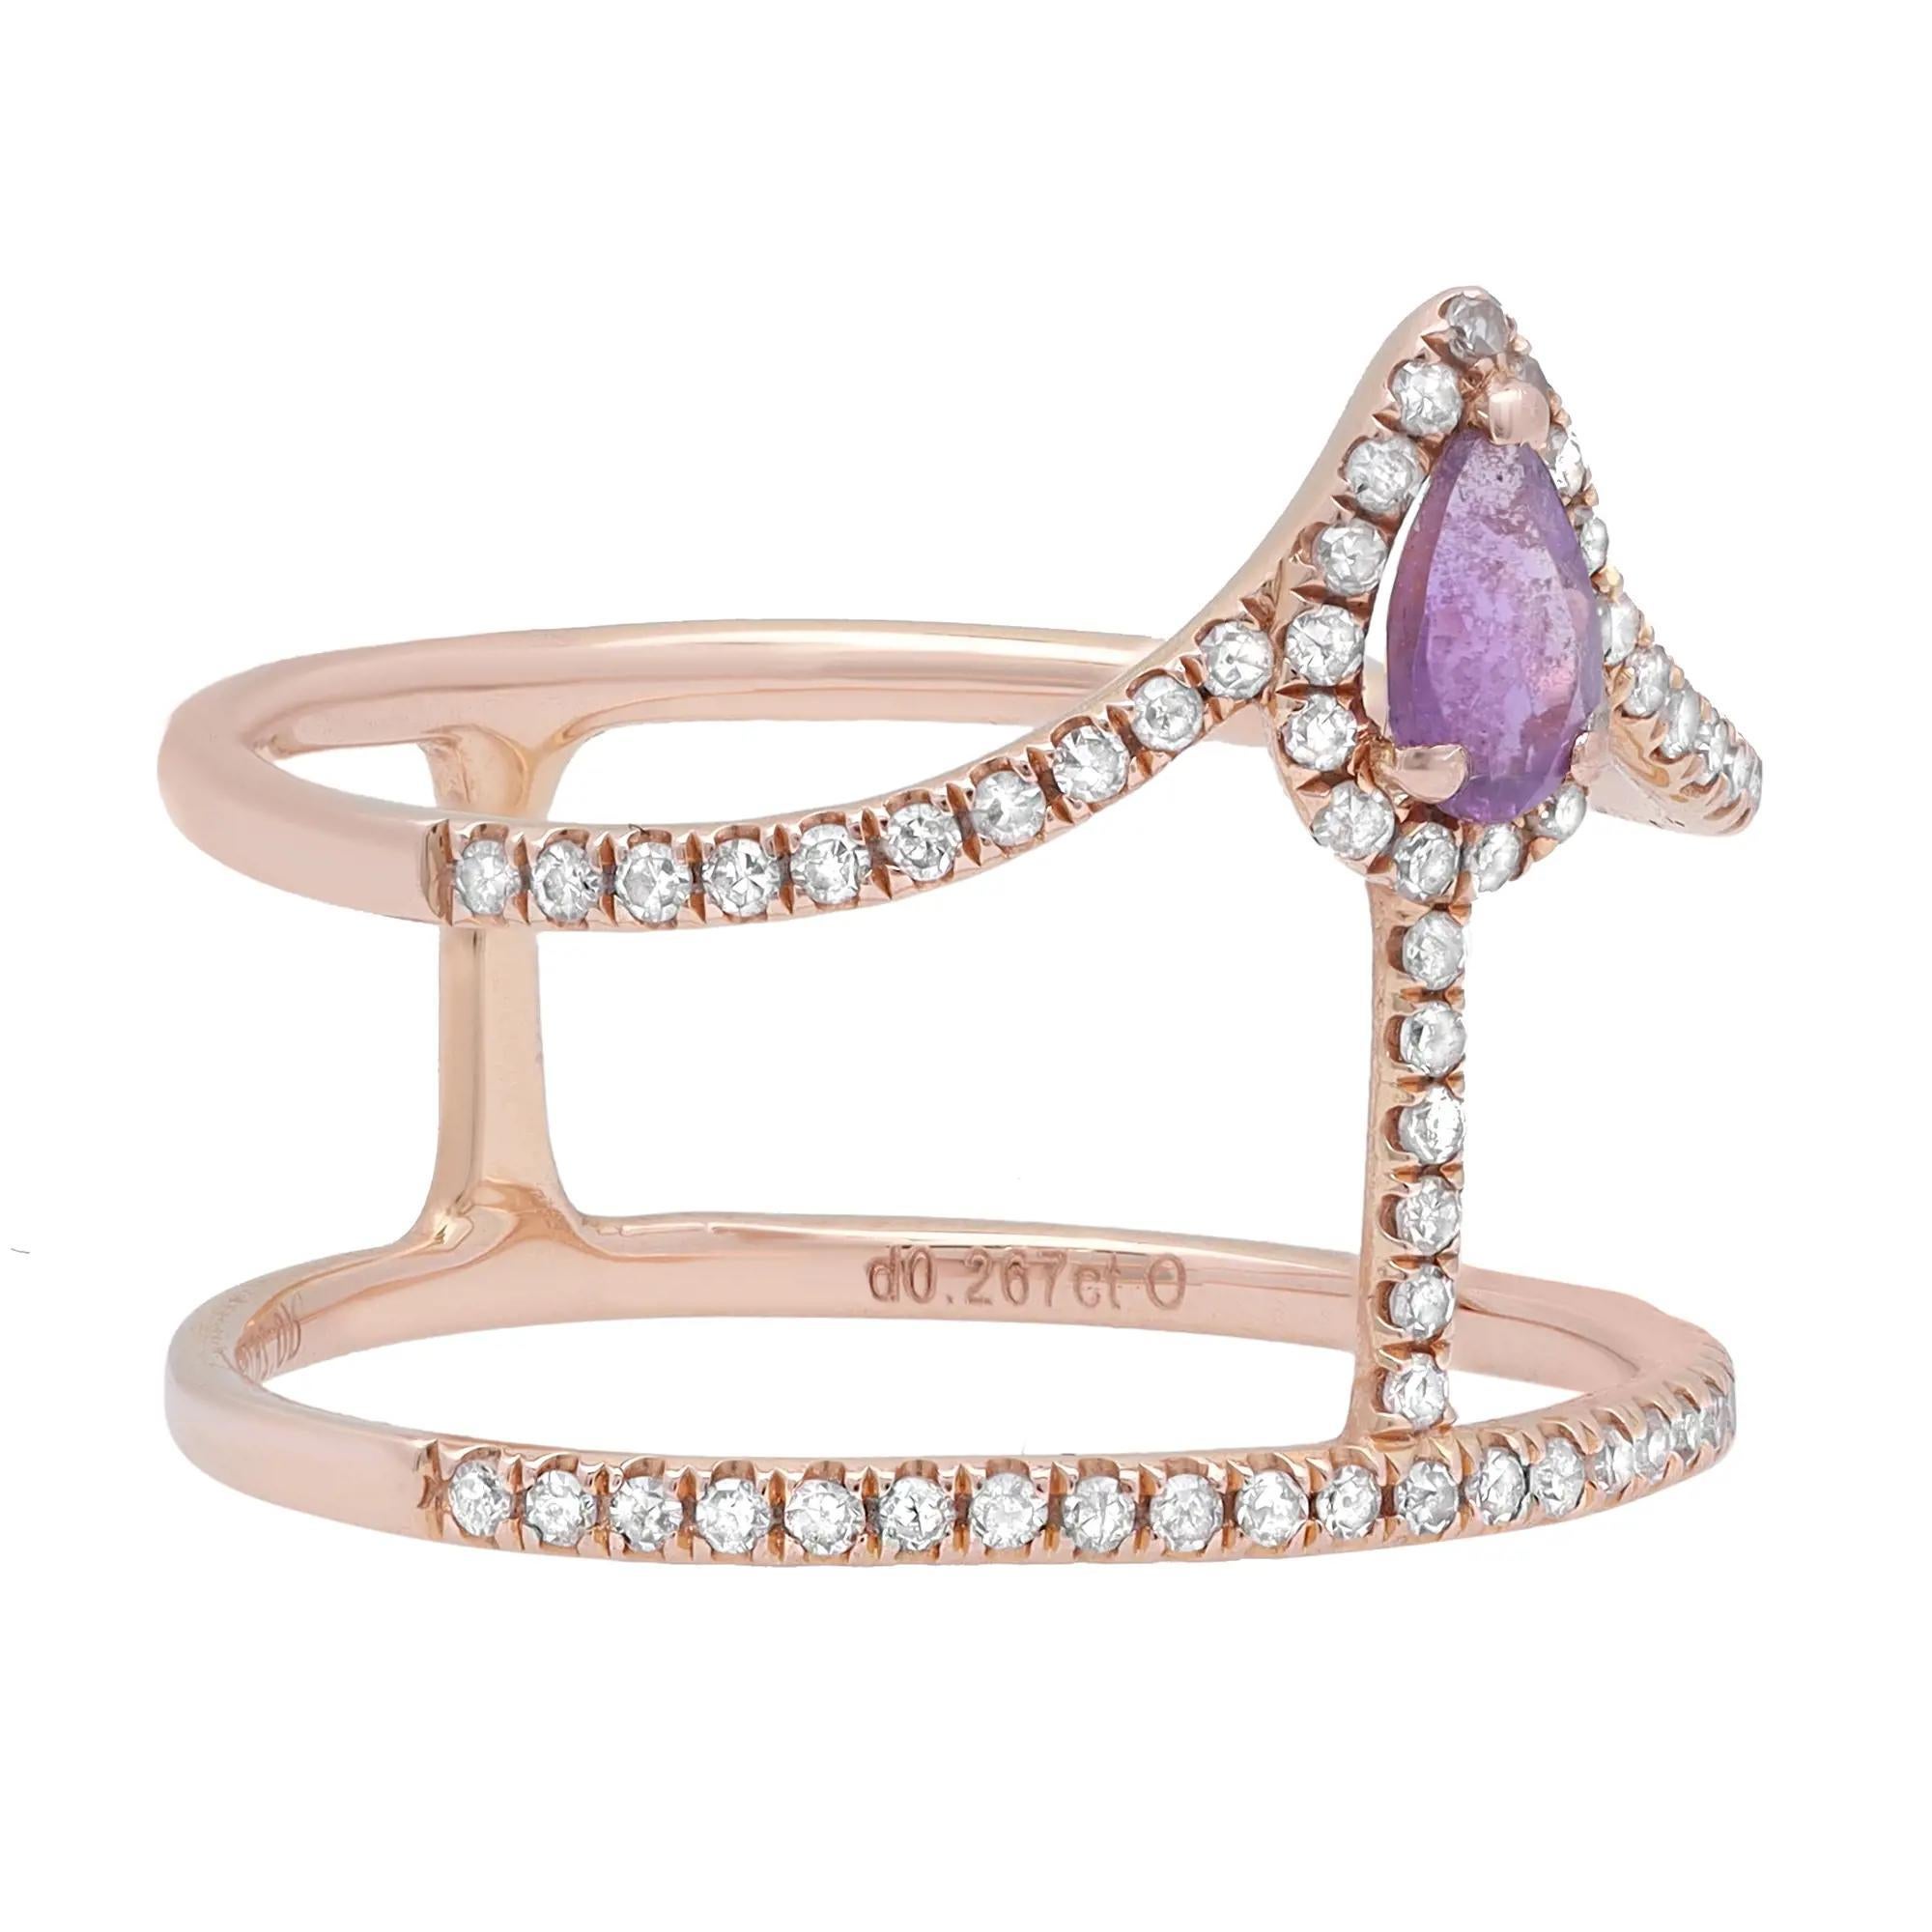 Round Cut Amethyst and Diamond Wide Band Ring 18K Rose Gold 0.26Cttw For Sale